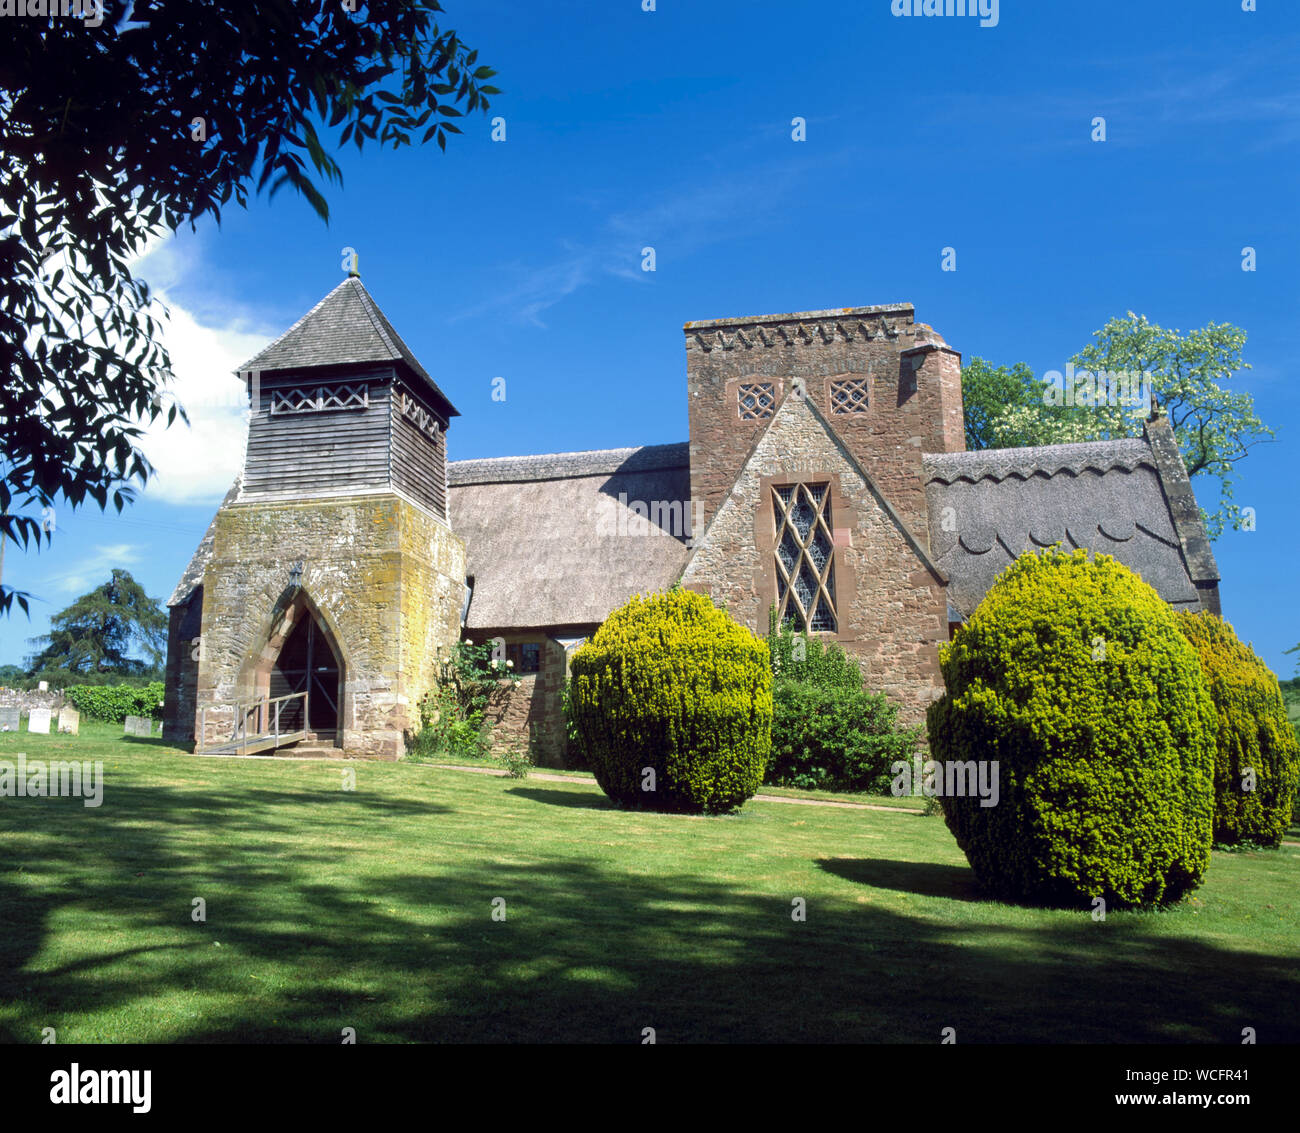 Thatched All Saints Church, Brockhampton, Herefordshire. Designed by William Lethaby in the Arts and Craft style1902. Stock Photo